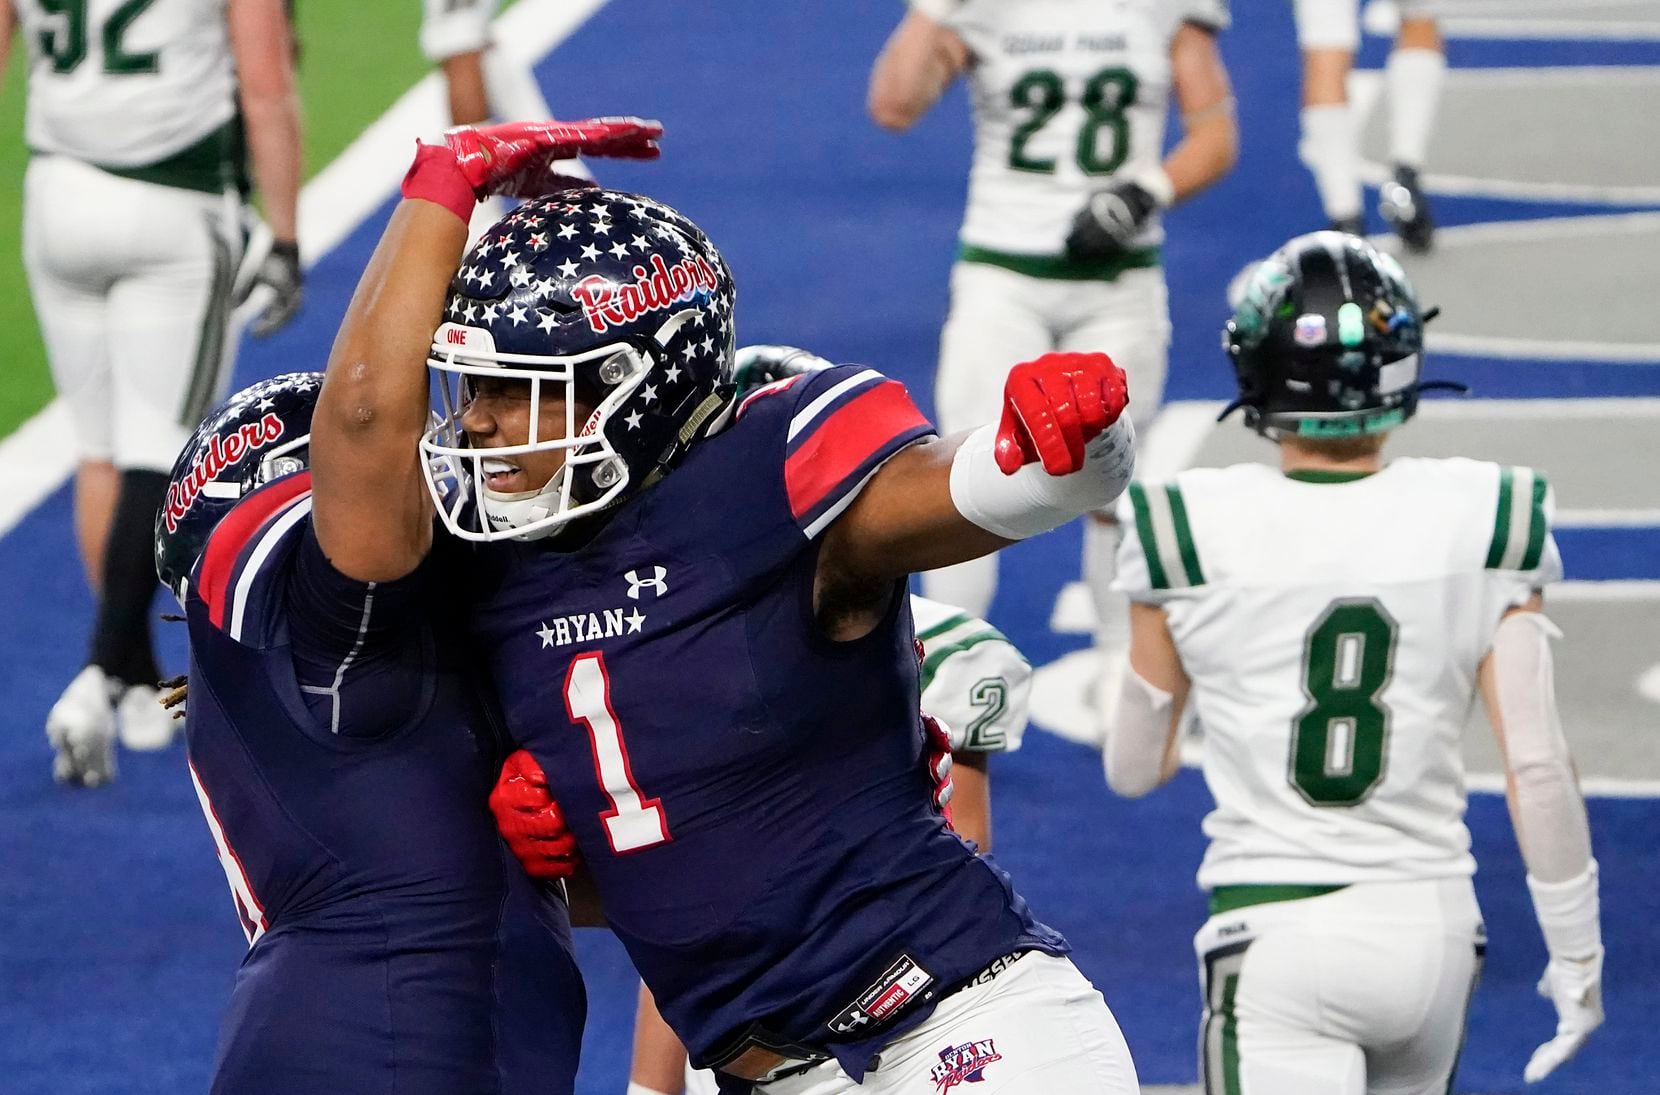 Denton Ryan wide receiver Ja'Tavion Sanders (1) celebrates with teammate Jay Sheppard (8) after catching a touchdown pass from quarterback Seth Henigan past Cedar Park defensive back Casyn Wiesenhutter (8) during the second half of the Class 5A Division I state football championship game at AT&T Stadium on Friday, Jan. 15, 2021, in Arlington, Texas. Ryan won the game 59-14. (Smiley N. Pool/The Dallas Morning News)